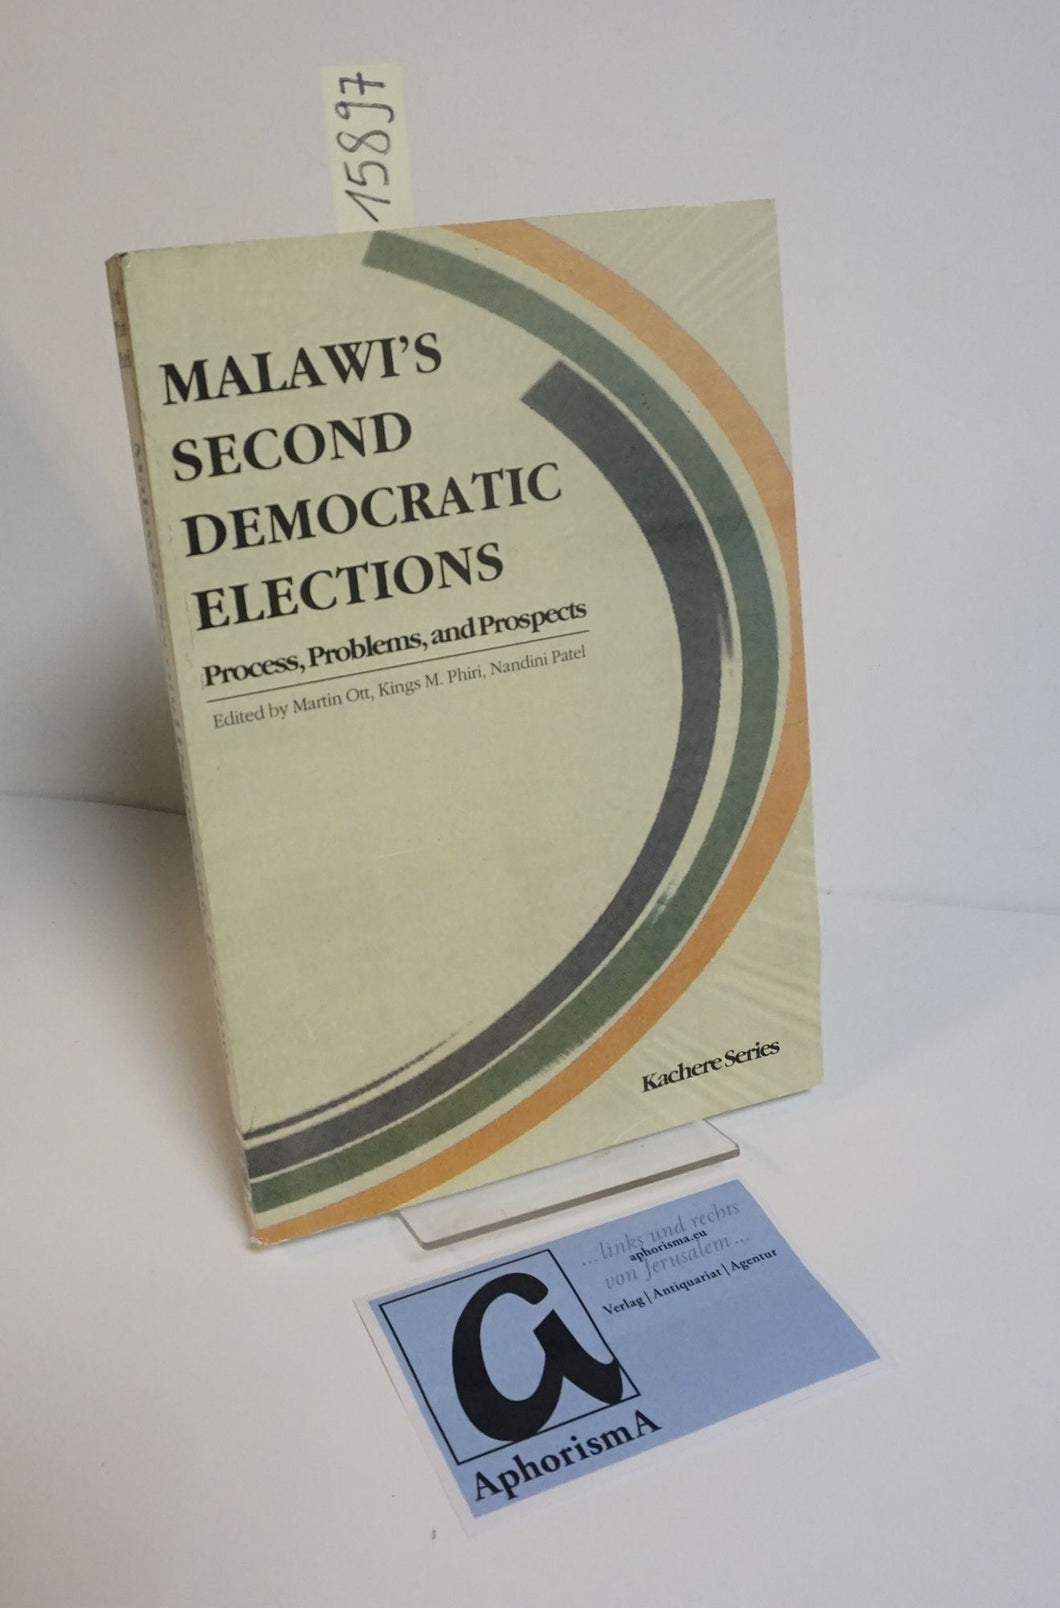 Malawi’s Second Democratic Elections